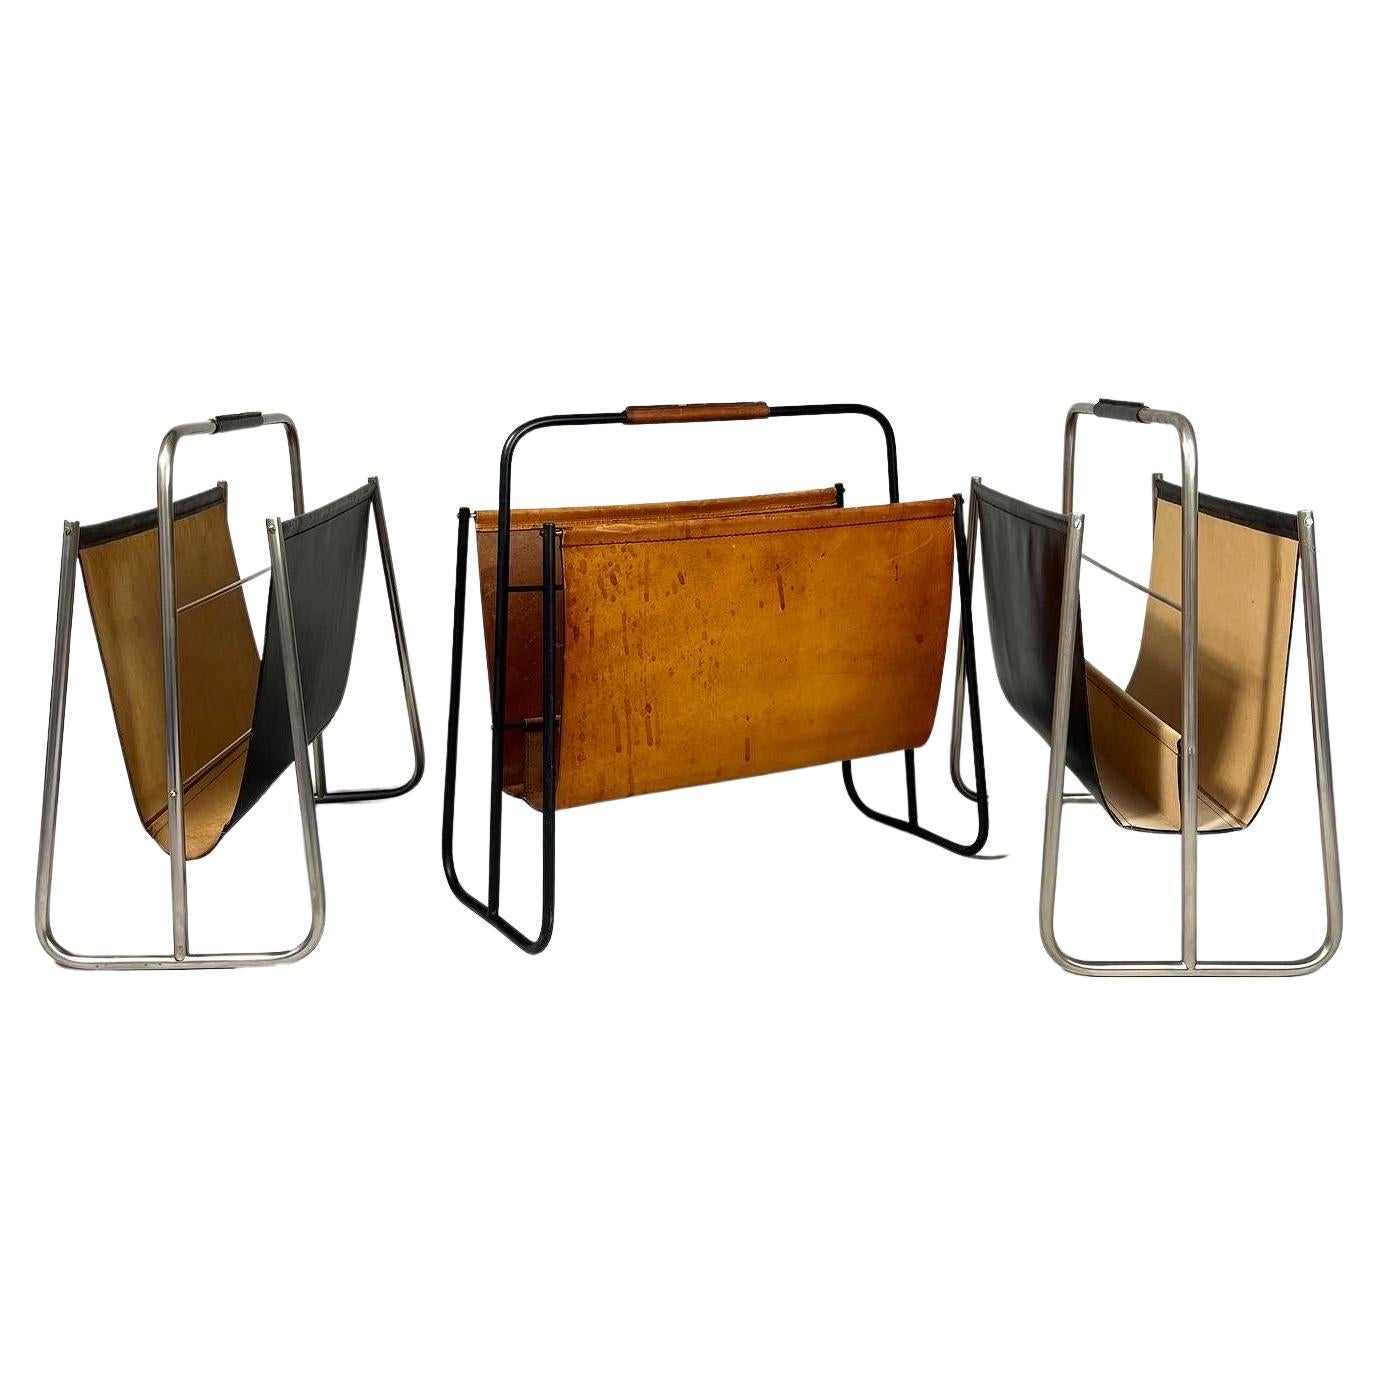 Collection of three Carl Auböck magazine racks with nickel plated & blackened frames, stitched leather, hand crafted by the Auböck workshop in Vienna, Austria in the 1950s. 

Width: 46 cm
Depth: 25 cm
Height: 44 cm

From left to right first